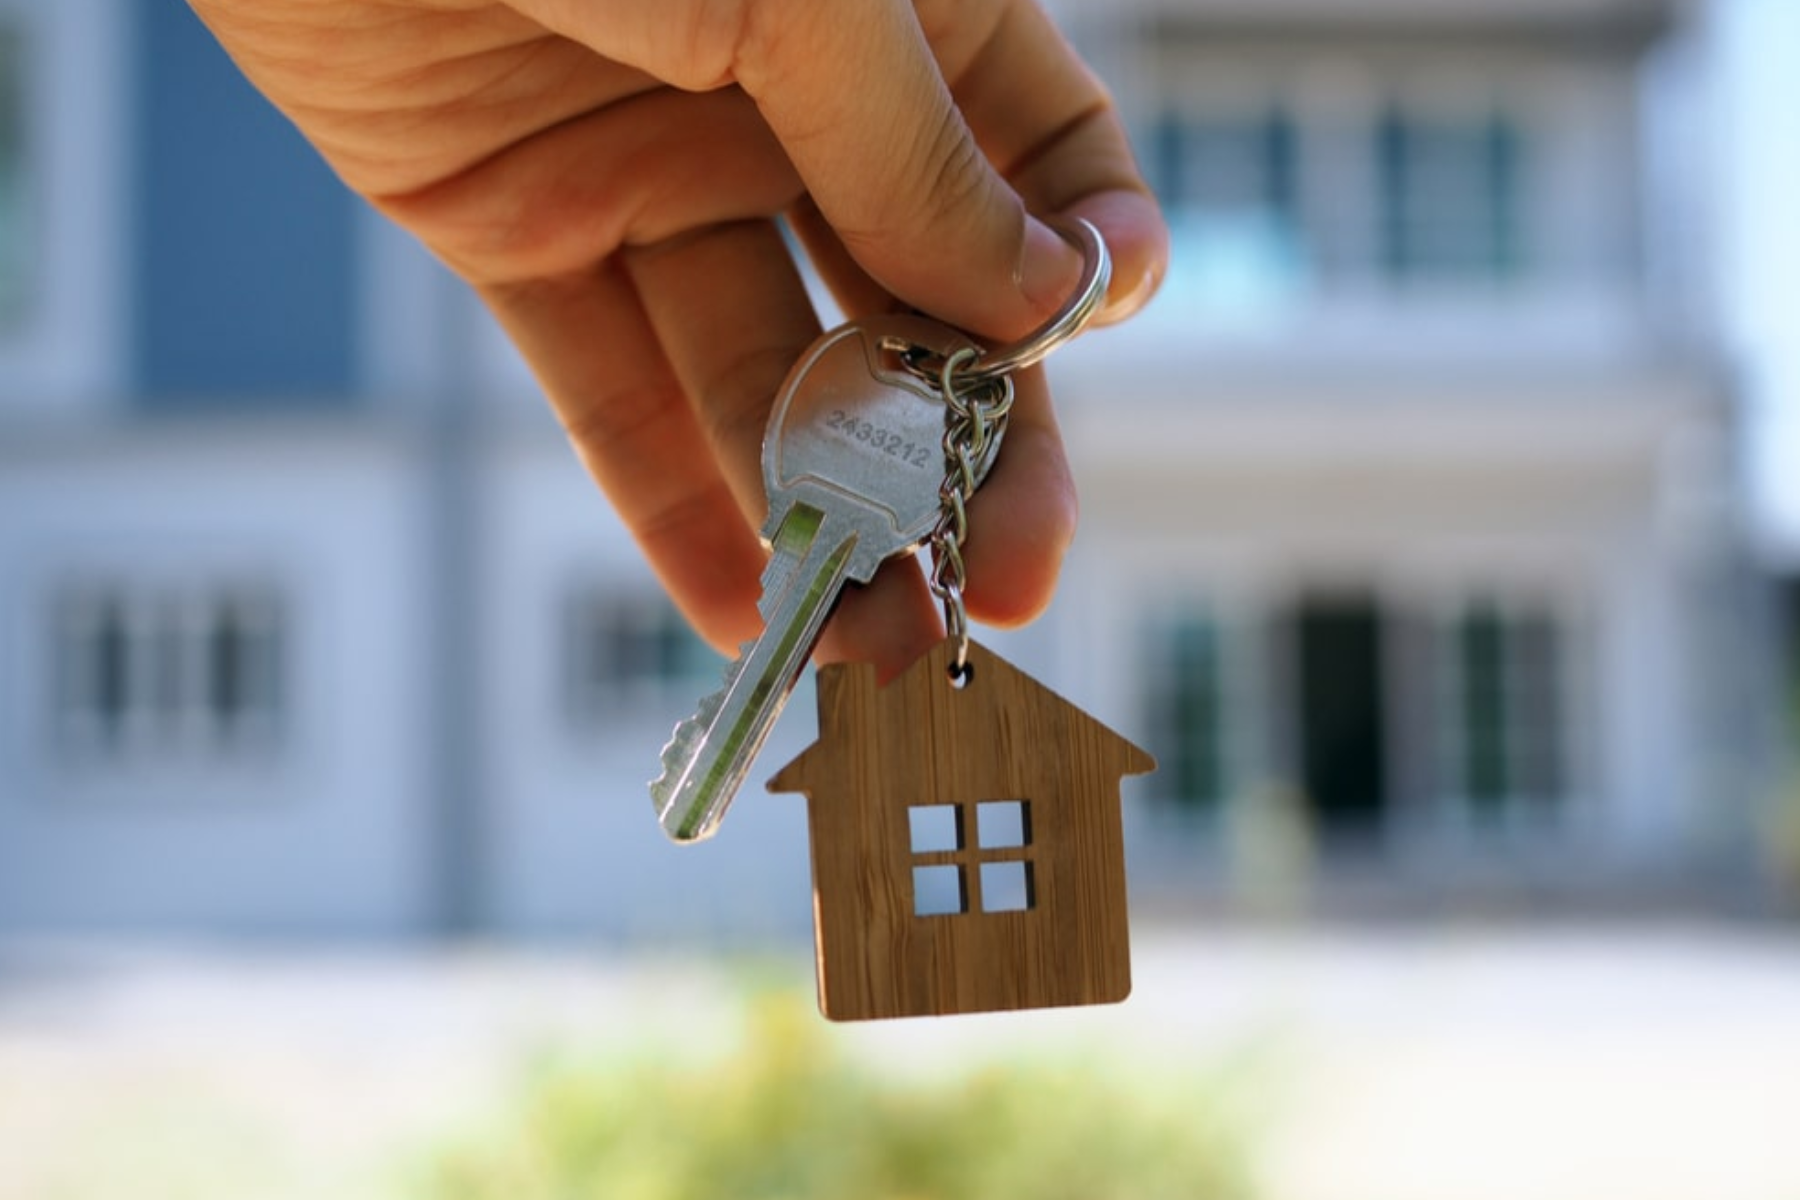 A person's hand clutching a key to the home